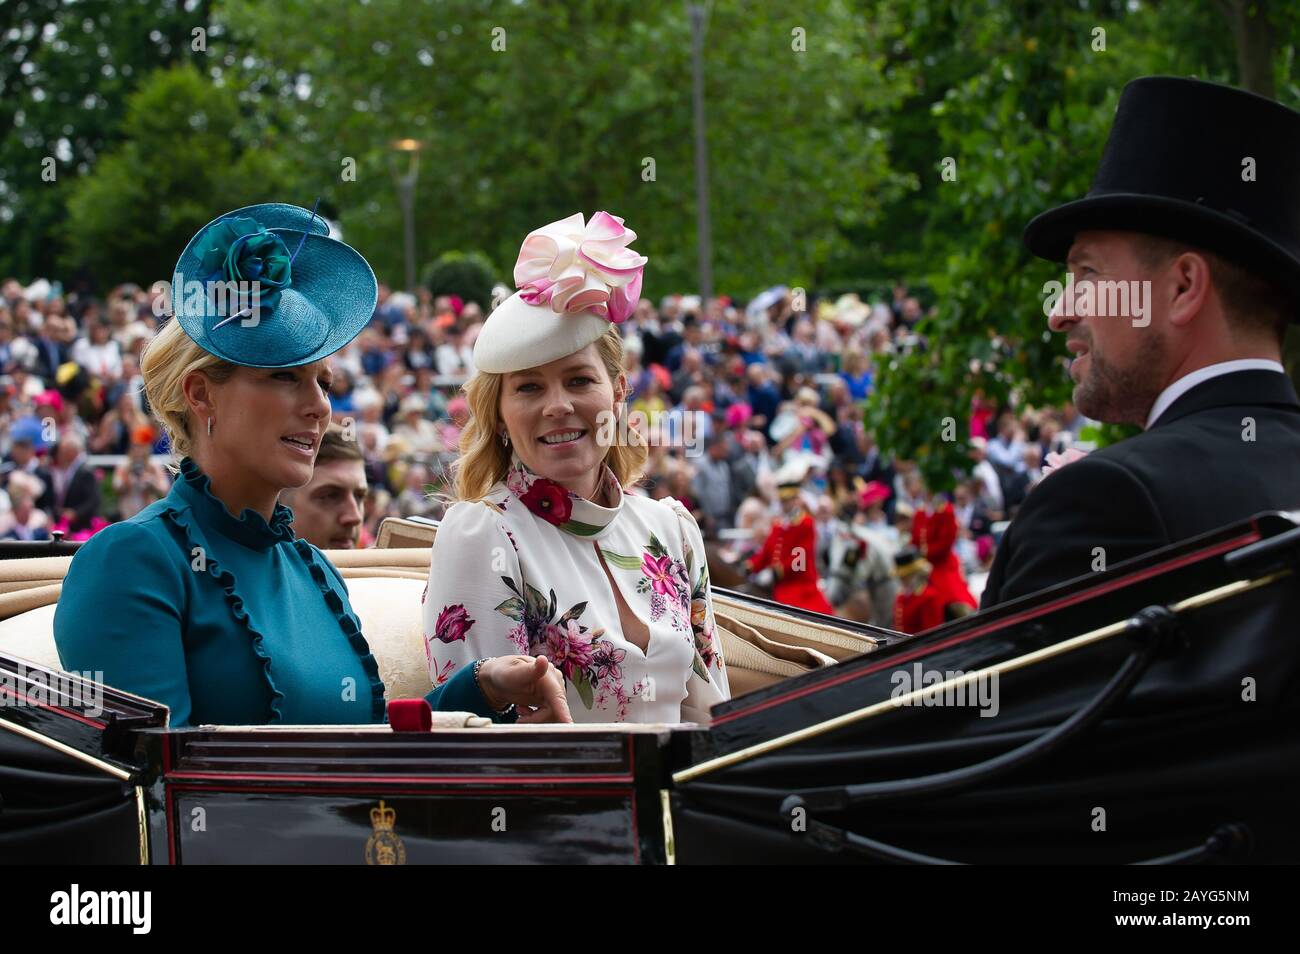 Royal Ascot Ladies Day, Ascot Racecourse, UK. 20th June, 2019. Zara Tindall, Autumn Phillips, Peter Phillps and Mike Tindall arrive in a horse drawn carriage in the  Royal Procession at Royal Ascot. Credit: Maureen McLean/Alamy Stock Photo